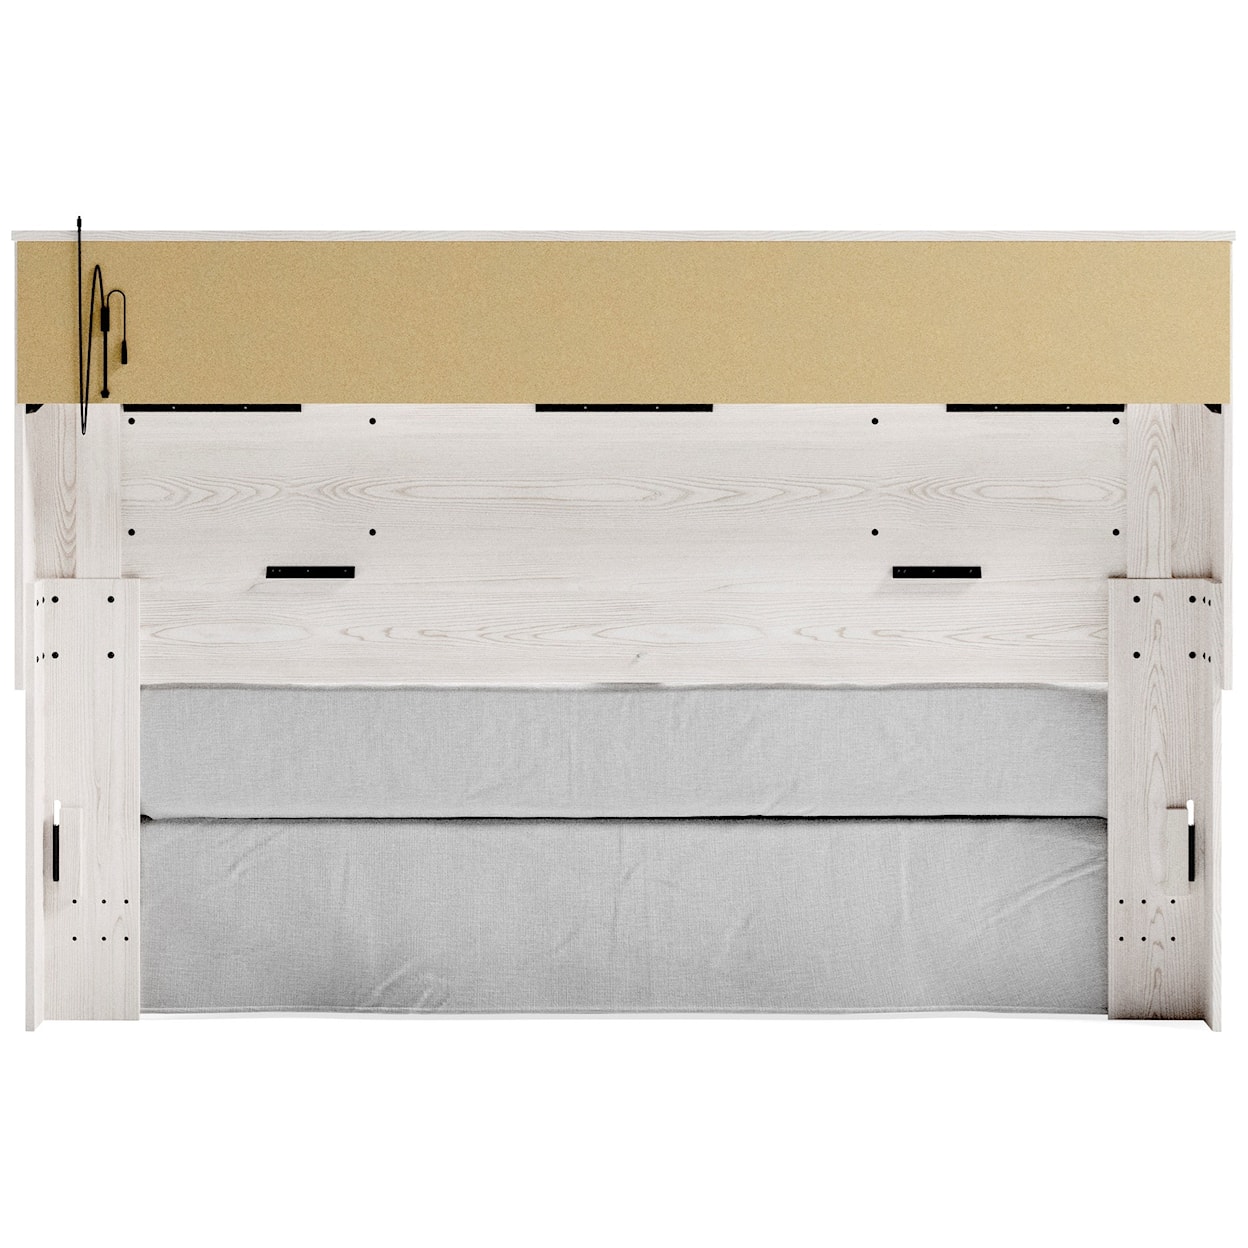 Signature Design Altyra King Upholstered Panel Bookcase Headboard